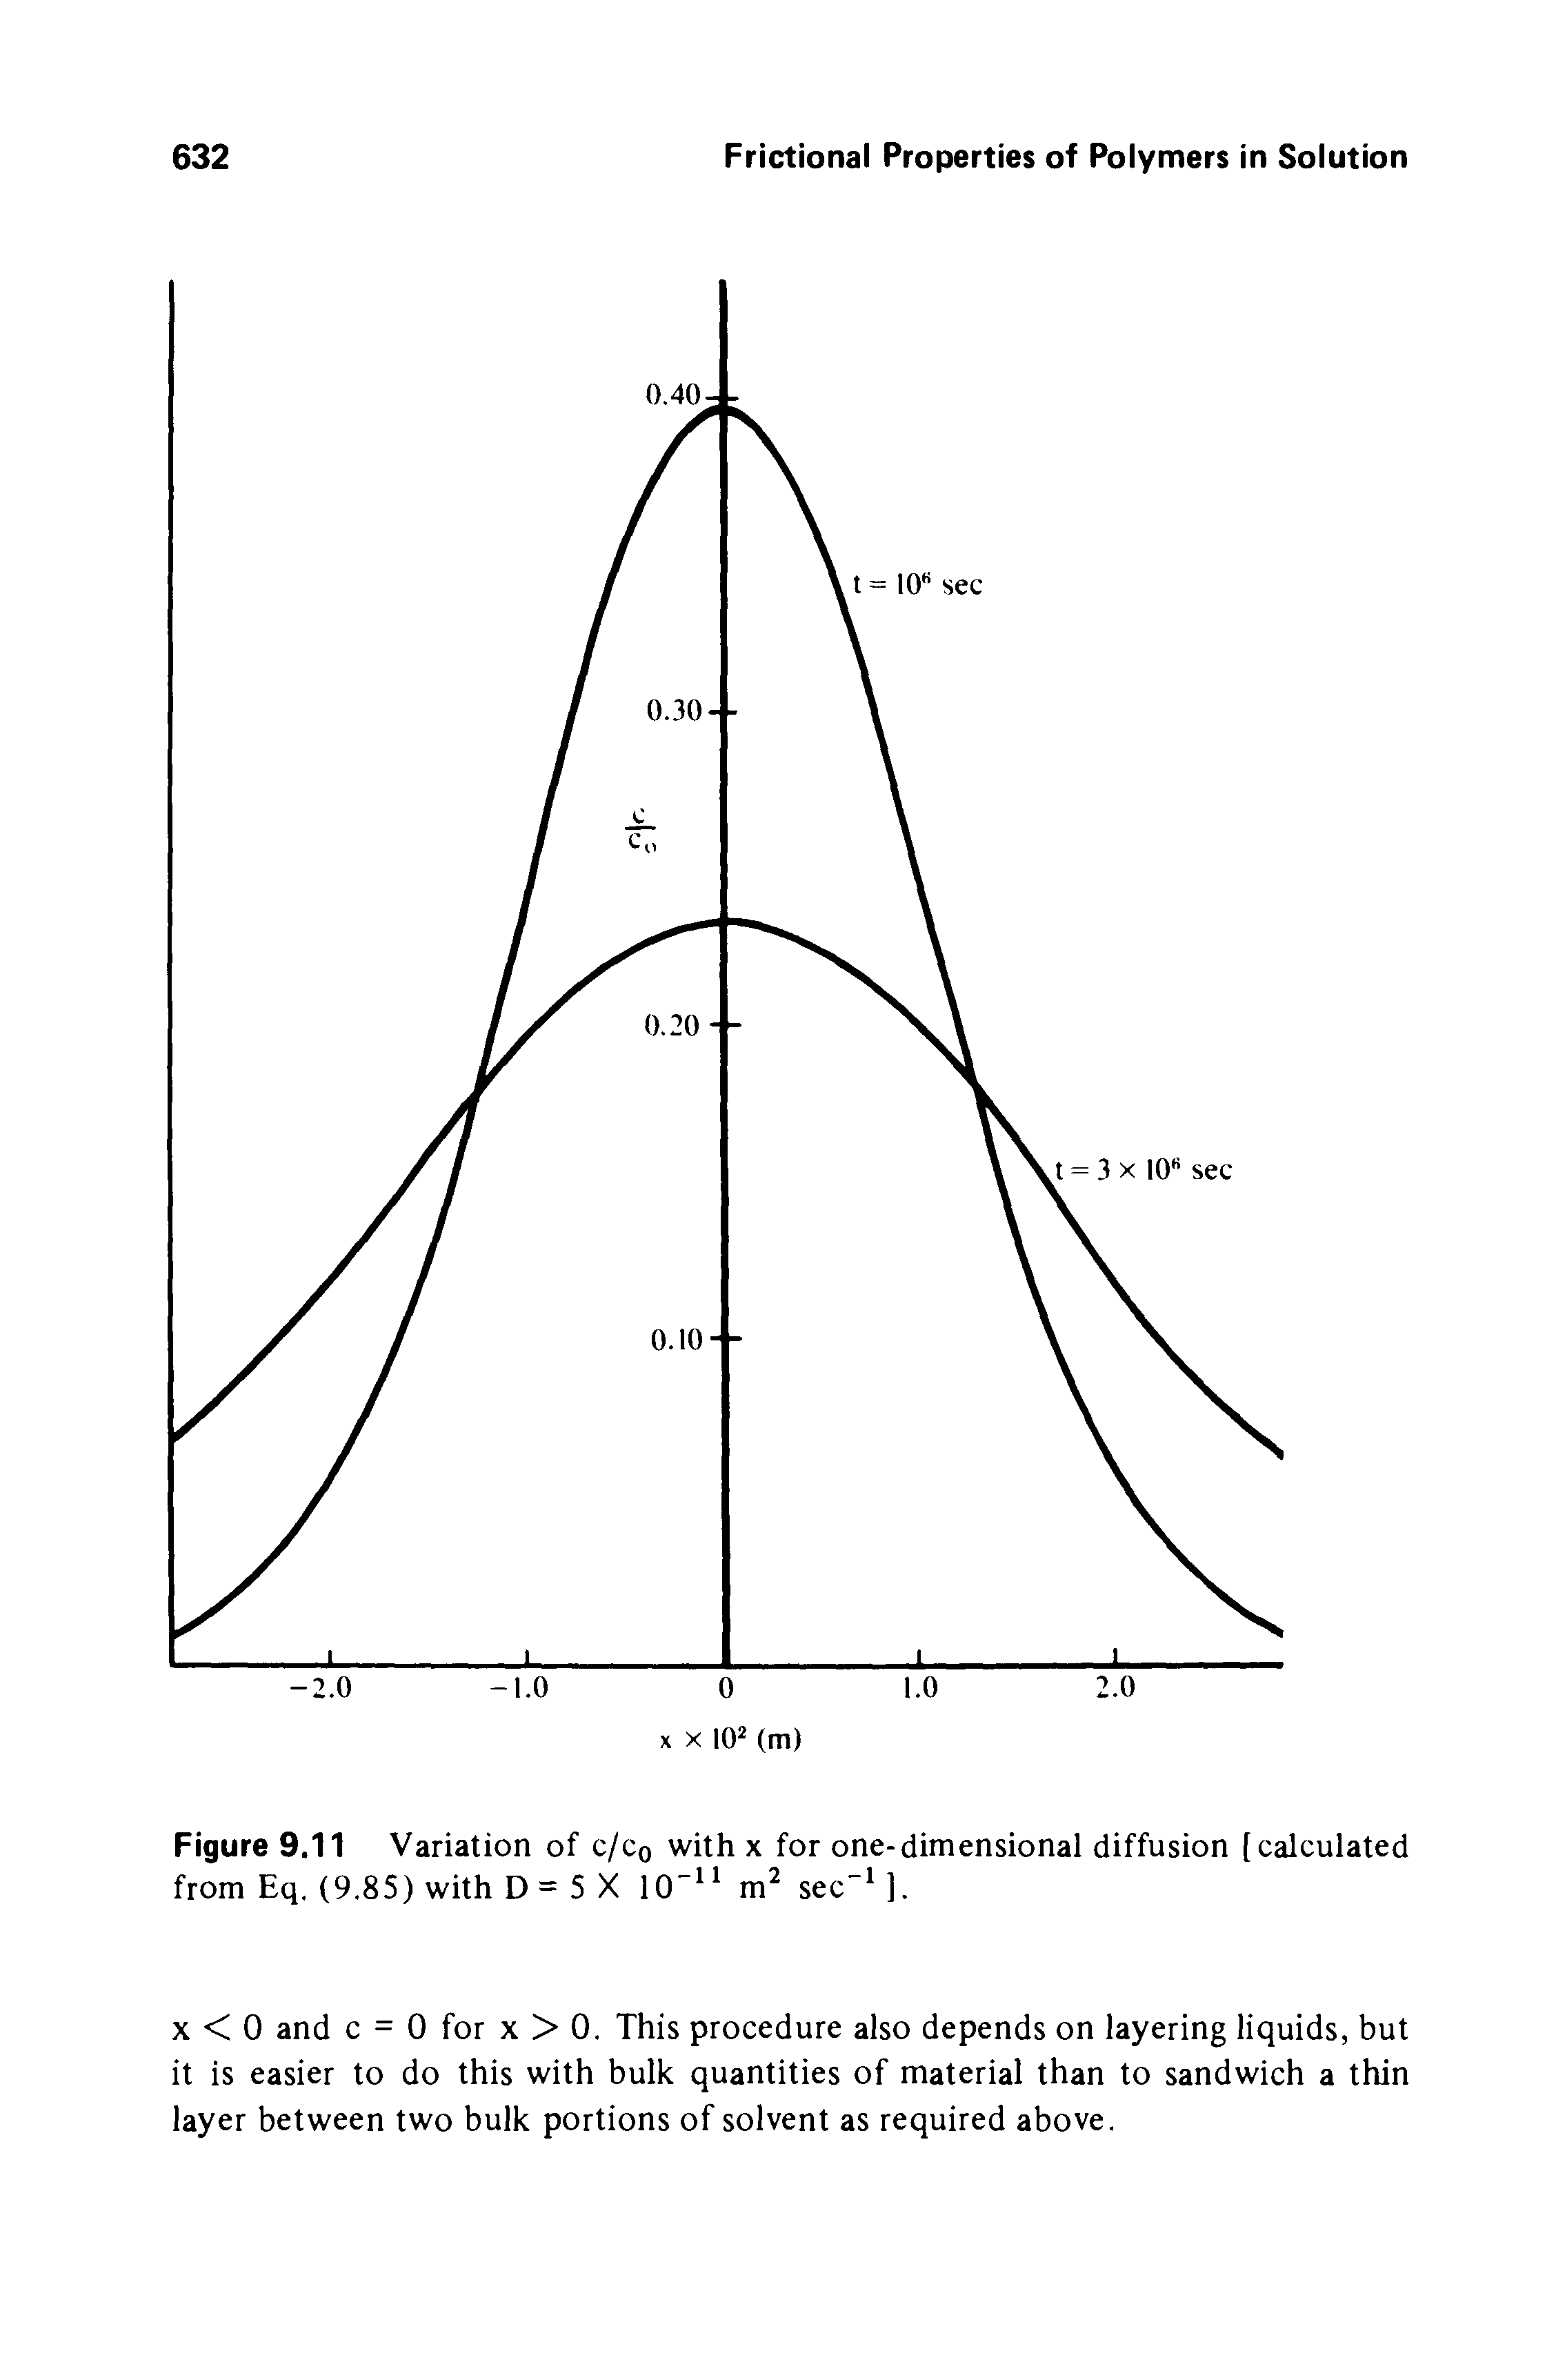 Figure 9.11 Variation of c/cq with x for one-dimensional diffusion [calculated from Eq. (9.85) with D = 5 X 10 m sec ].